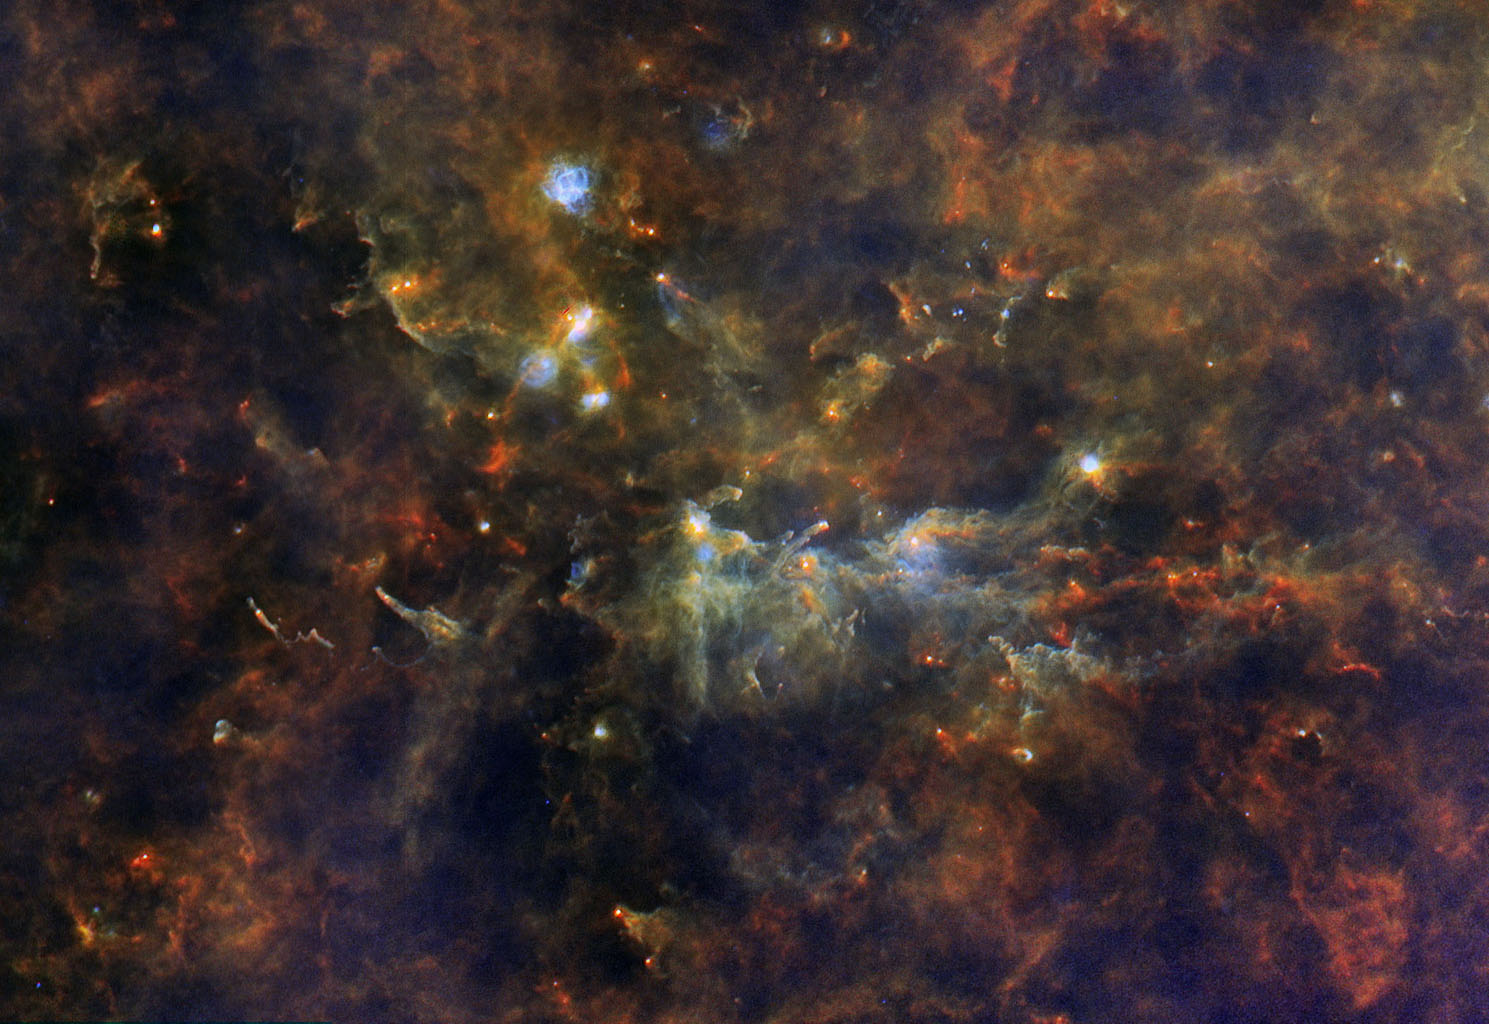 http://www.jpl.nasa.gov/spaceimages/images/largesize/PIA13500_hires.jpg